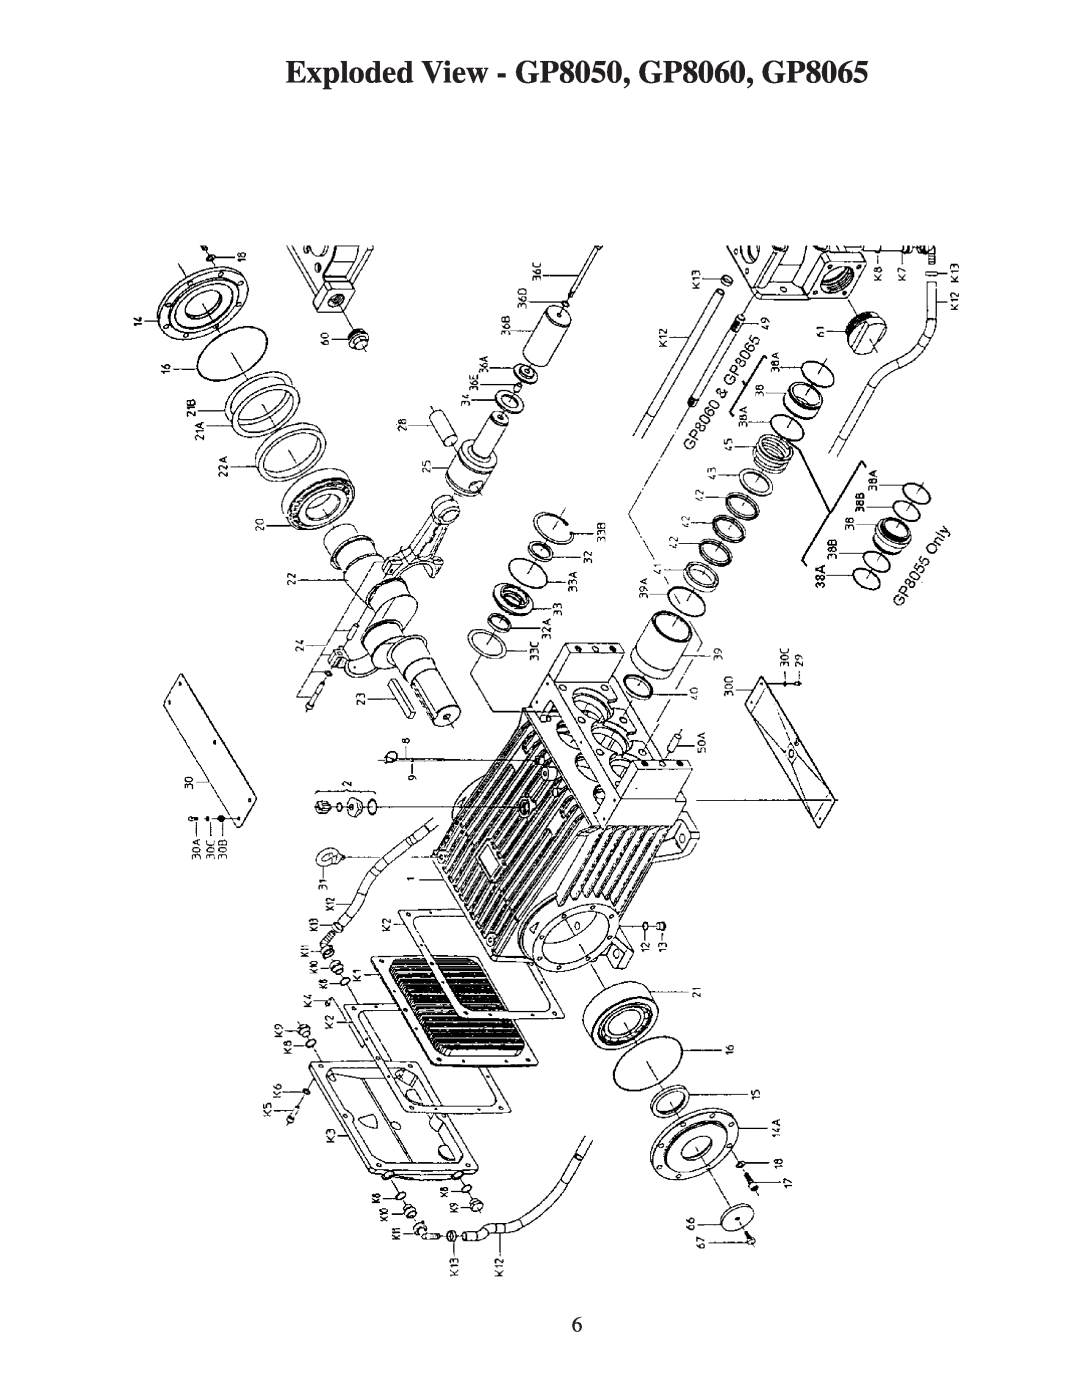 Giant GP8055 installation instructions Exploded View - GP8050, GP8060, GP8065 